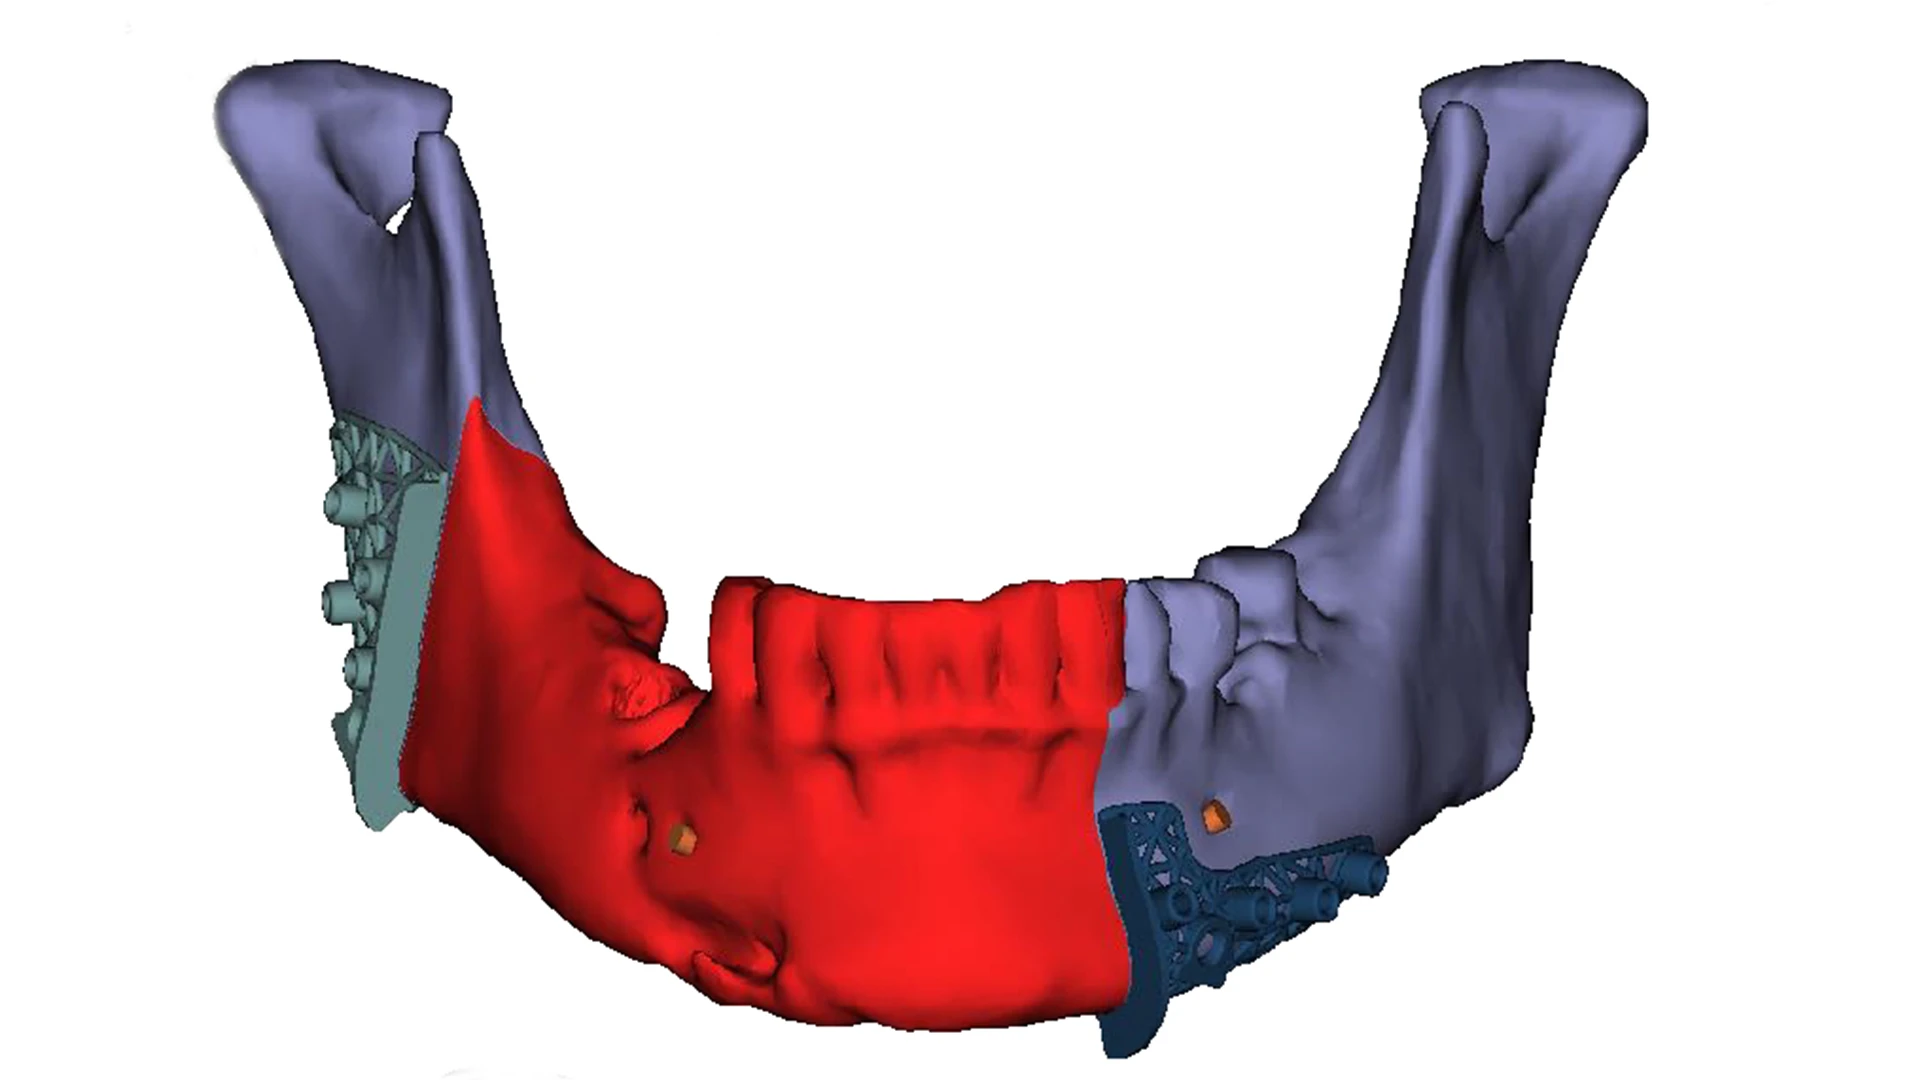 Planned removal of the diseased portion of the mandible (red).